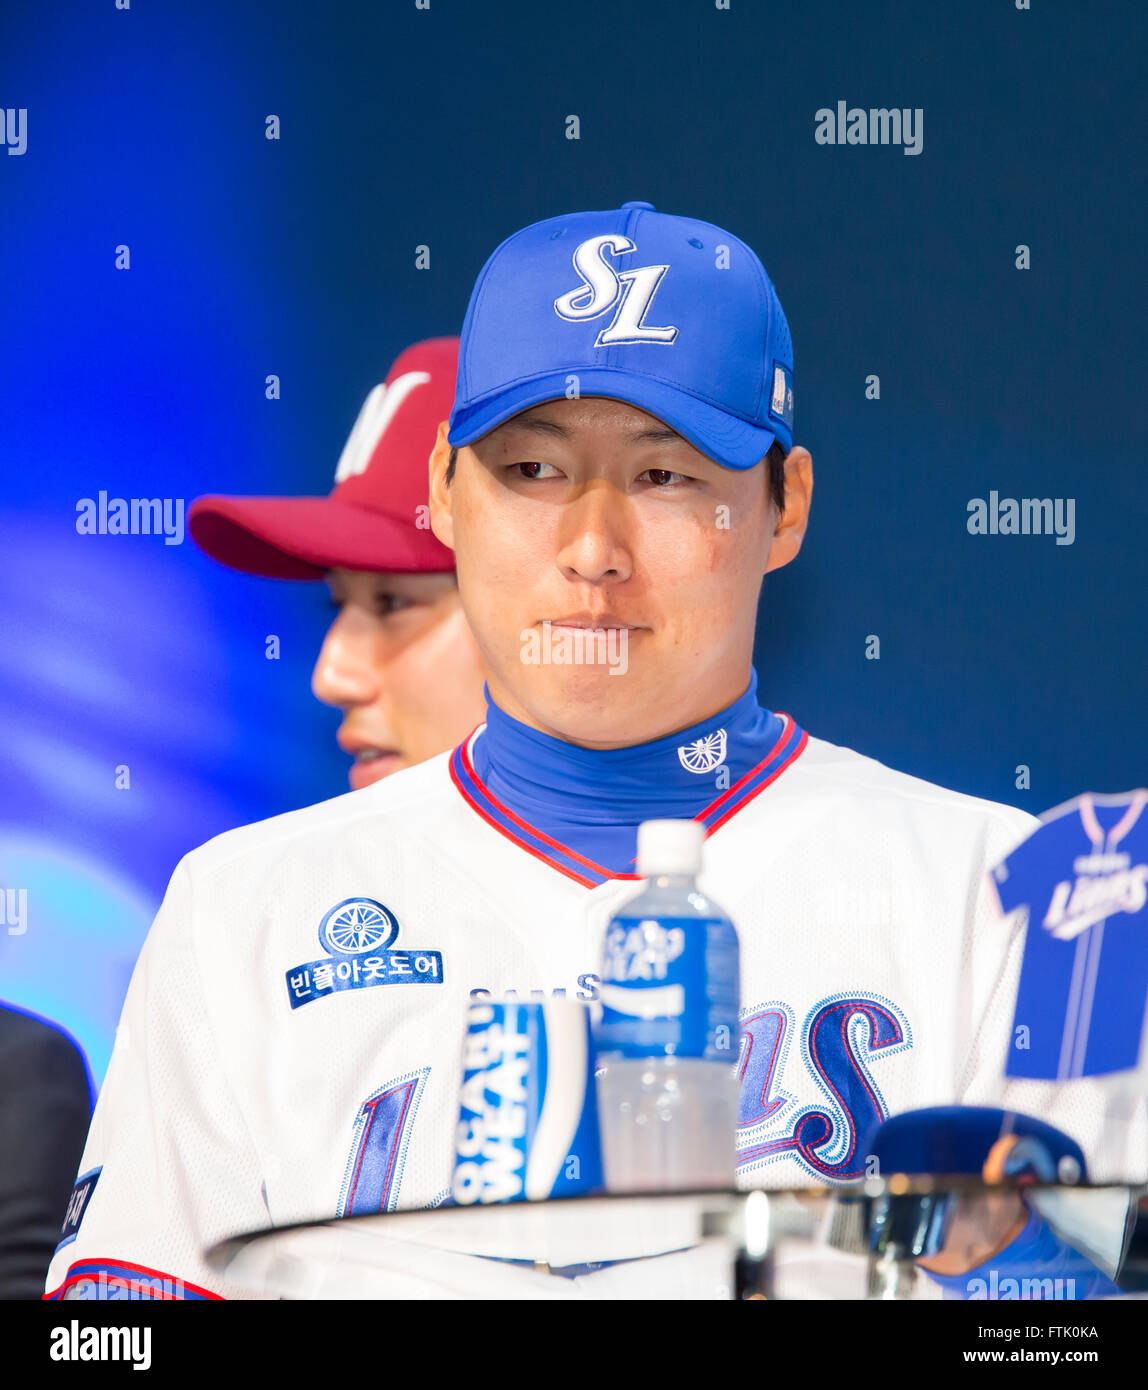 Cha Woo-chan, Mar 28, 2016 : South Korean baseball team Samsung Lions'  pitcher Cha Woo-chan attends a media day and fanfest of 10 clubs in the  Korea Baseball Organization (KBO) in Seoul,